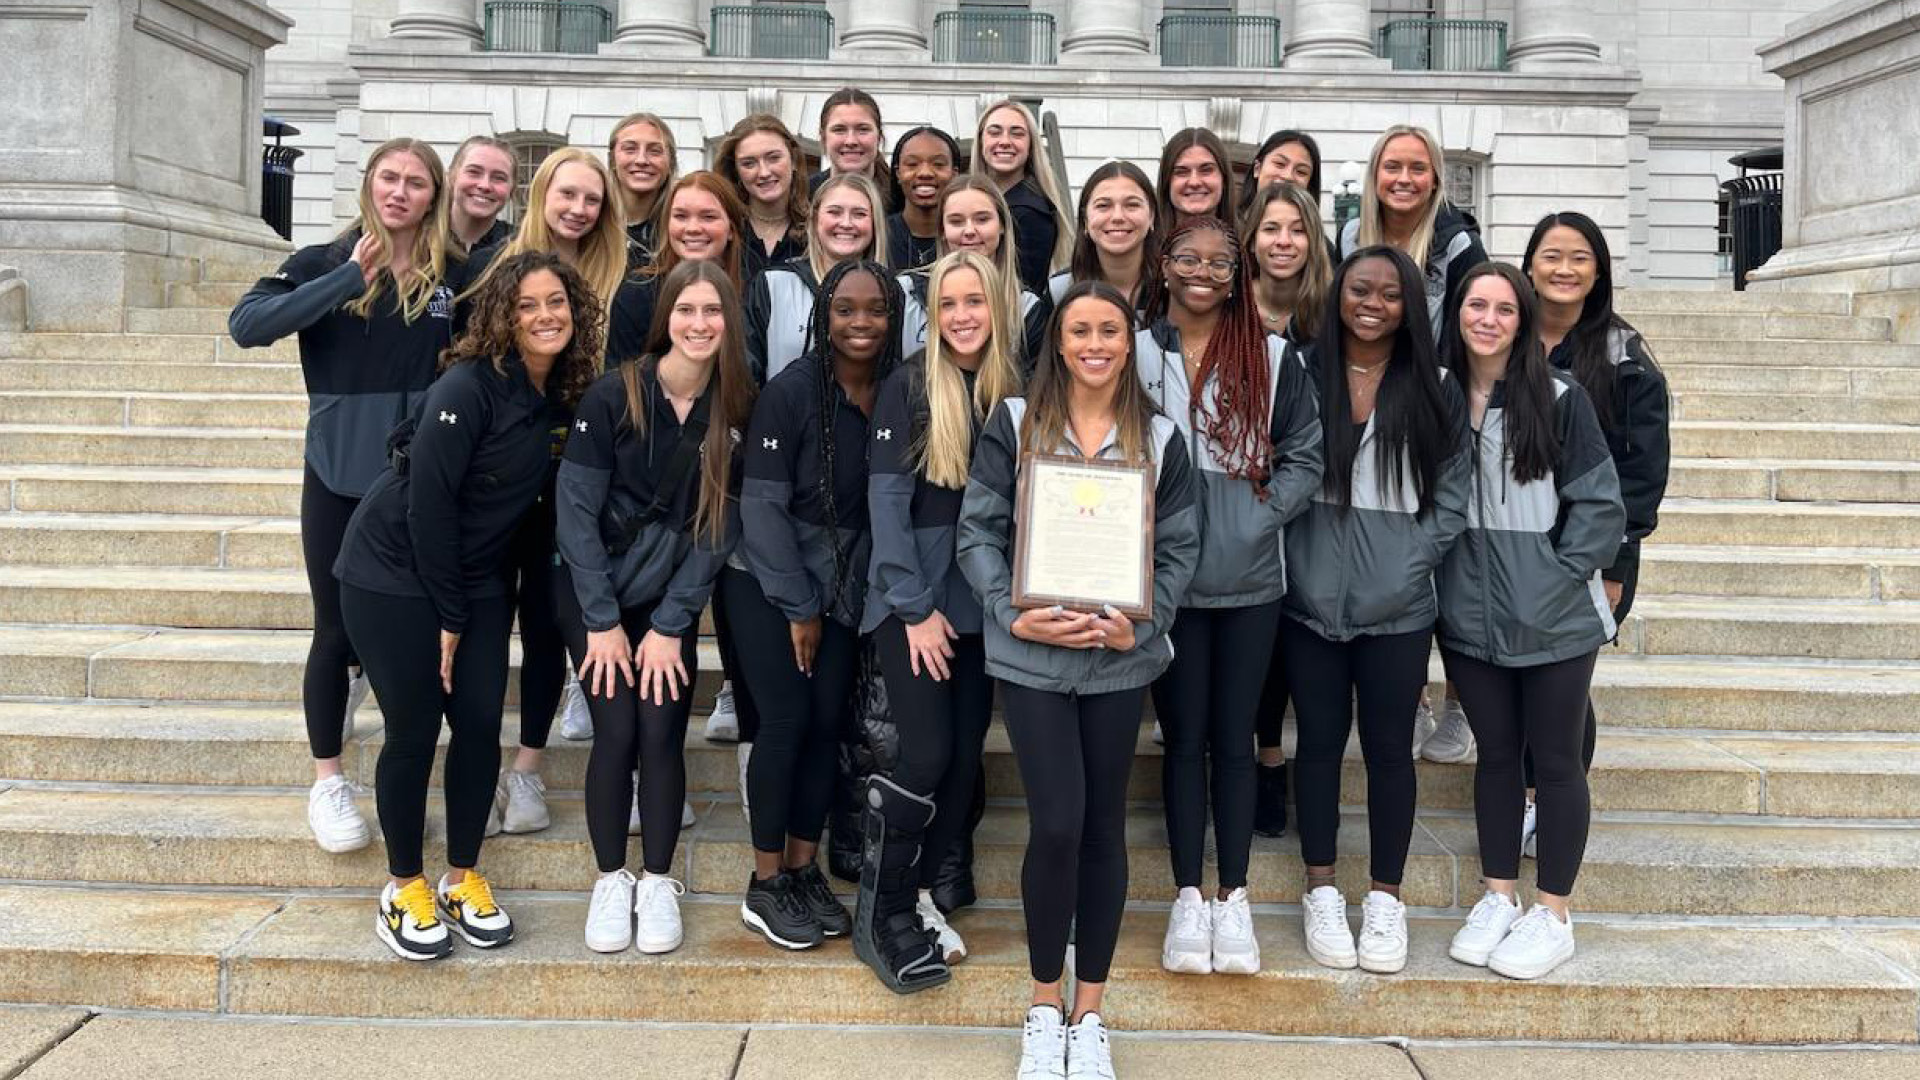 The UW-Oshkosh Women's Gymnastics Team with the plaque presented to them by the Wisconsin State Assembly